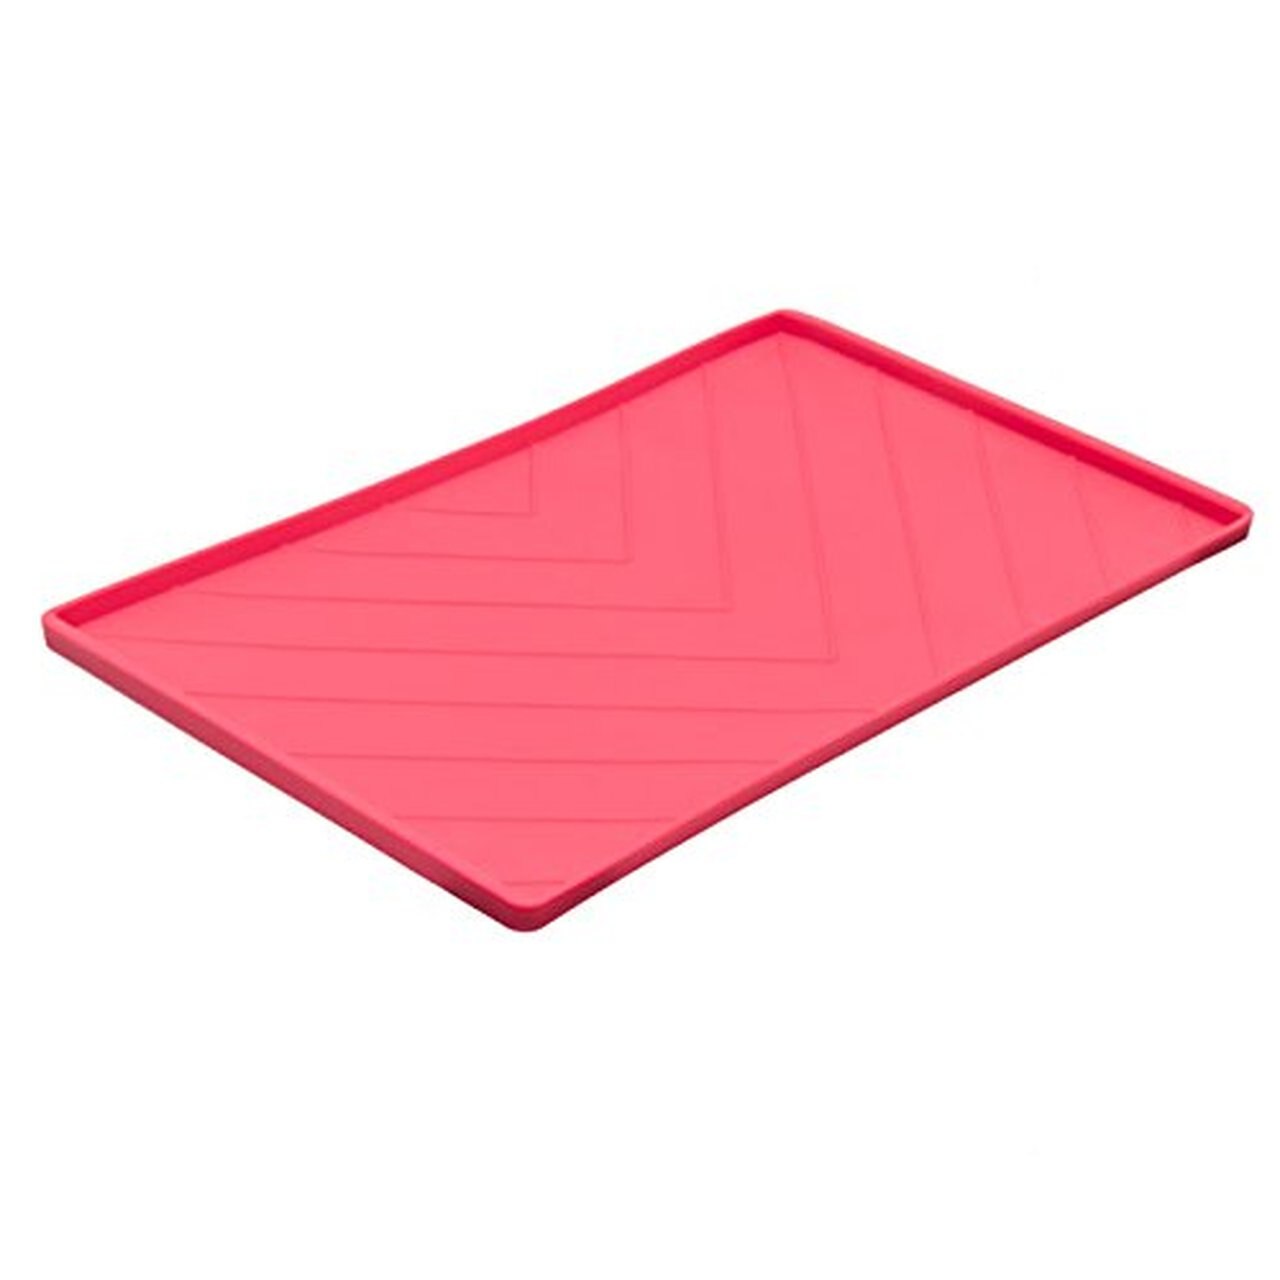 checked Silicone Bowl Mat with Raised Edge - Large Size Image 3